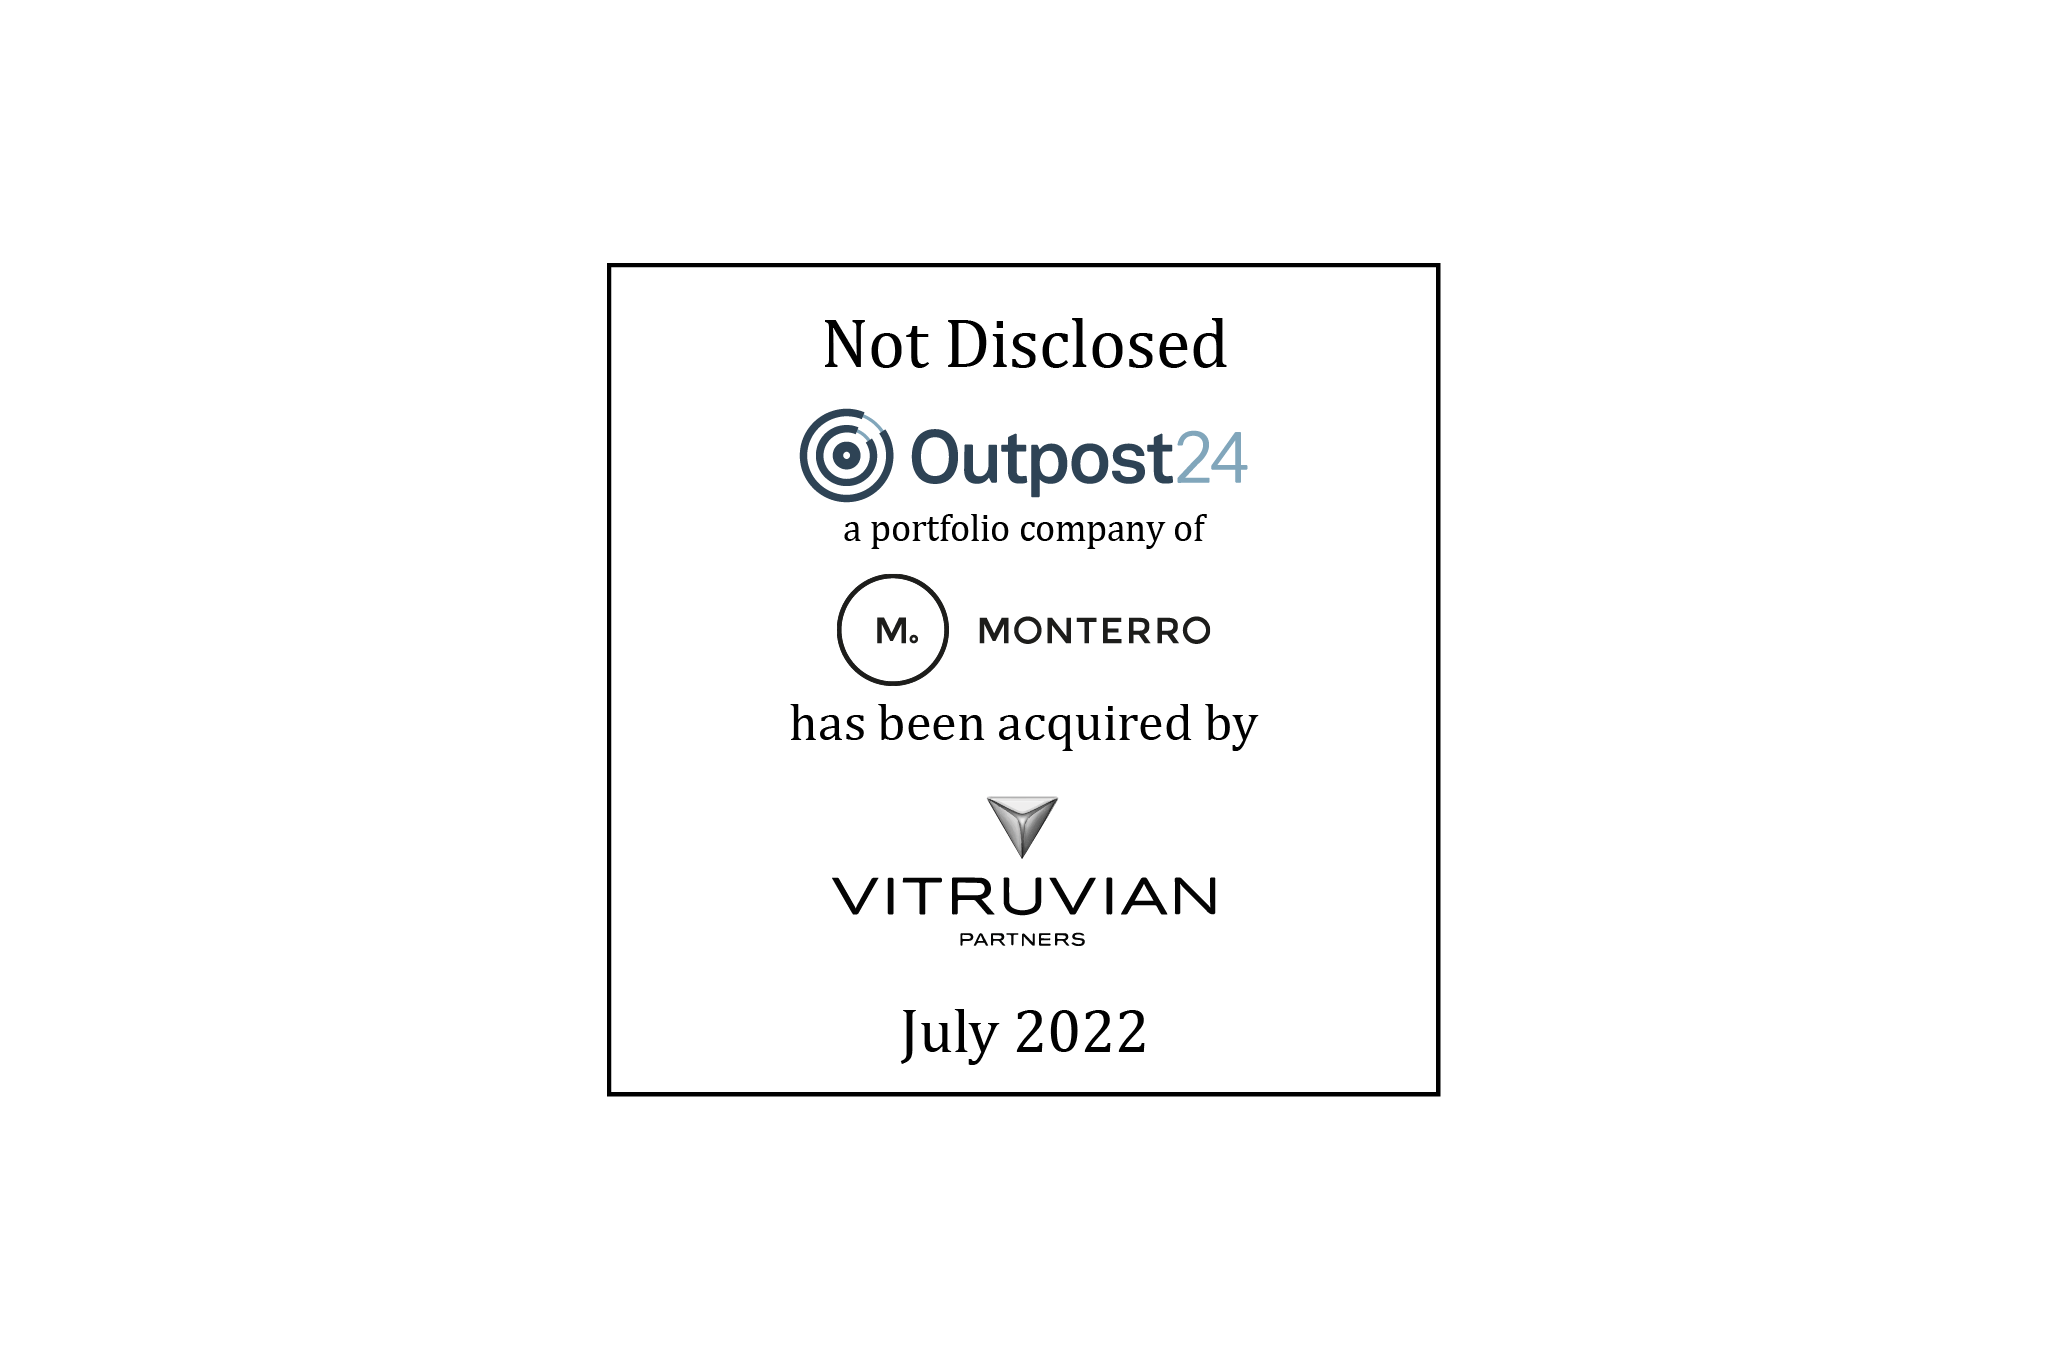 Not Disclosed | Outpost24, a portfolio company of Monterro, has been Acquired by Vitruvian Partners | July 2022